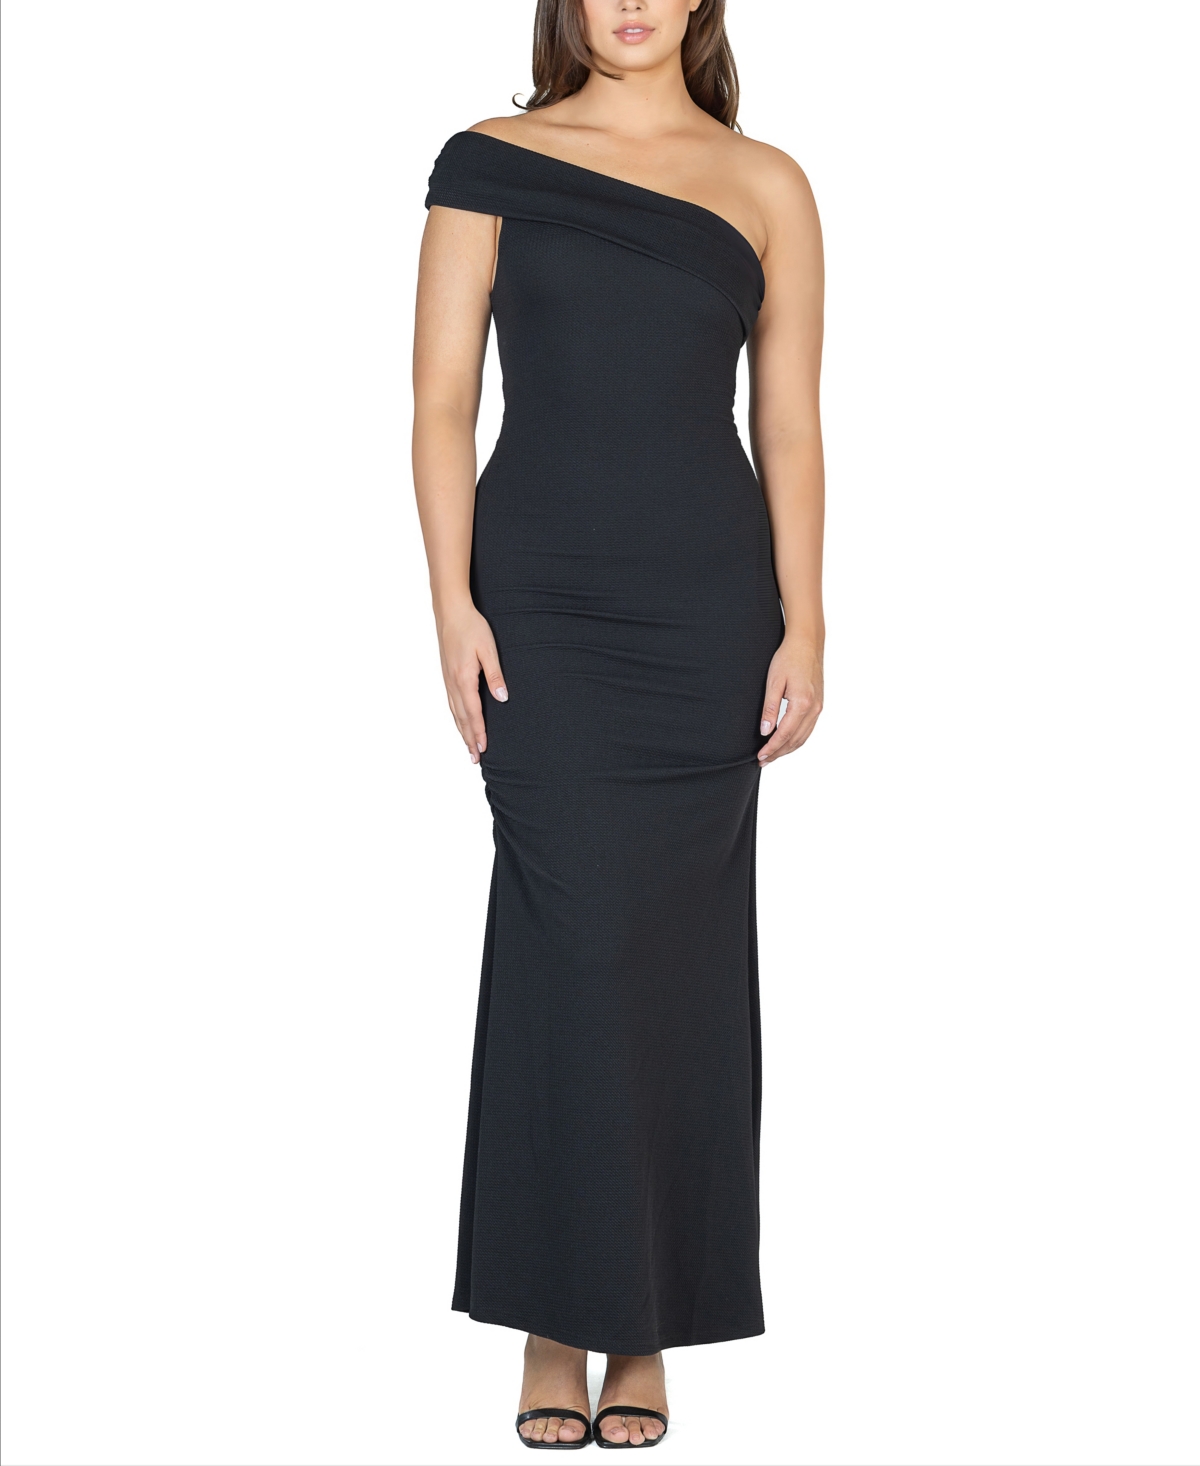 24seven Comfort Apparel Women's Party One Shoulder Rouched Maxi Dress In Black